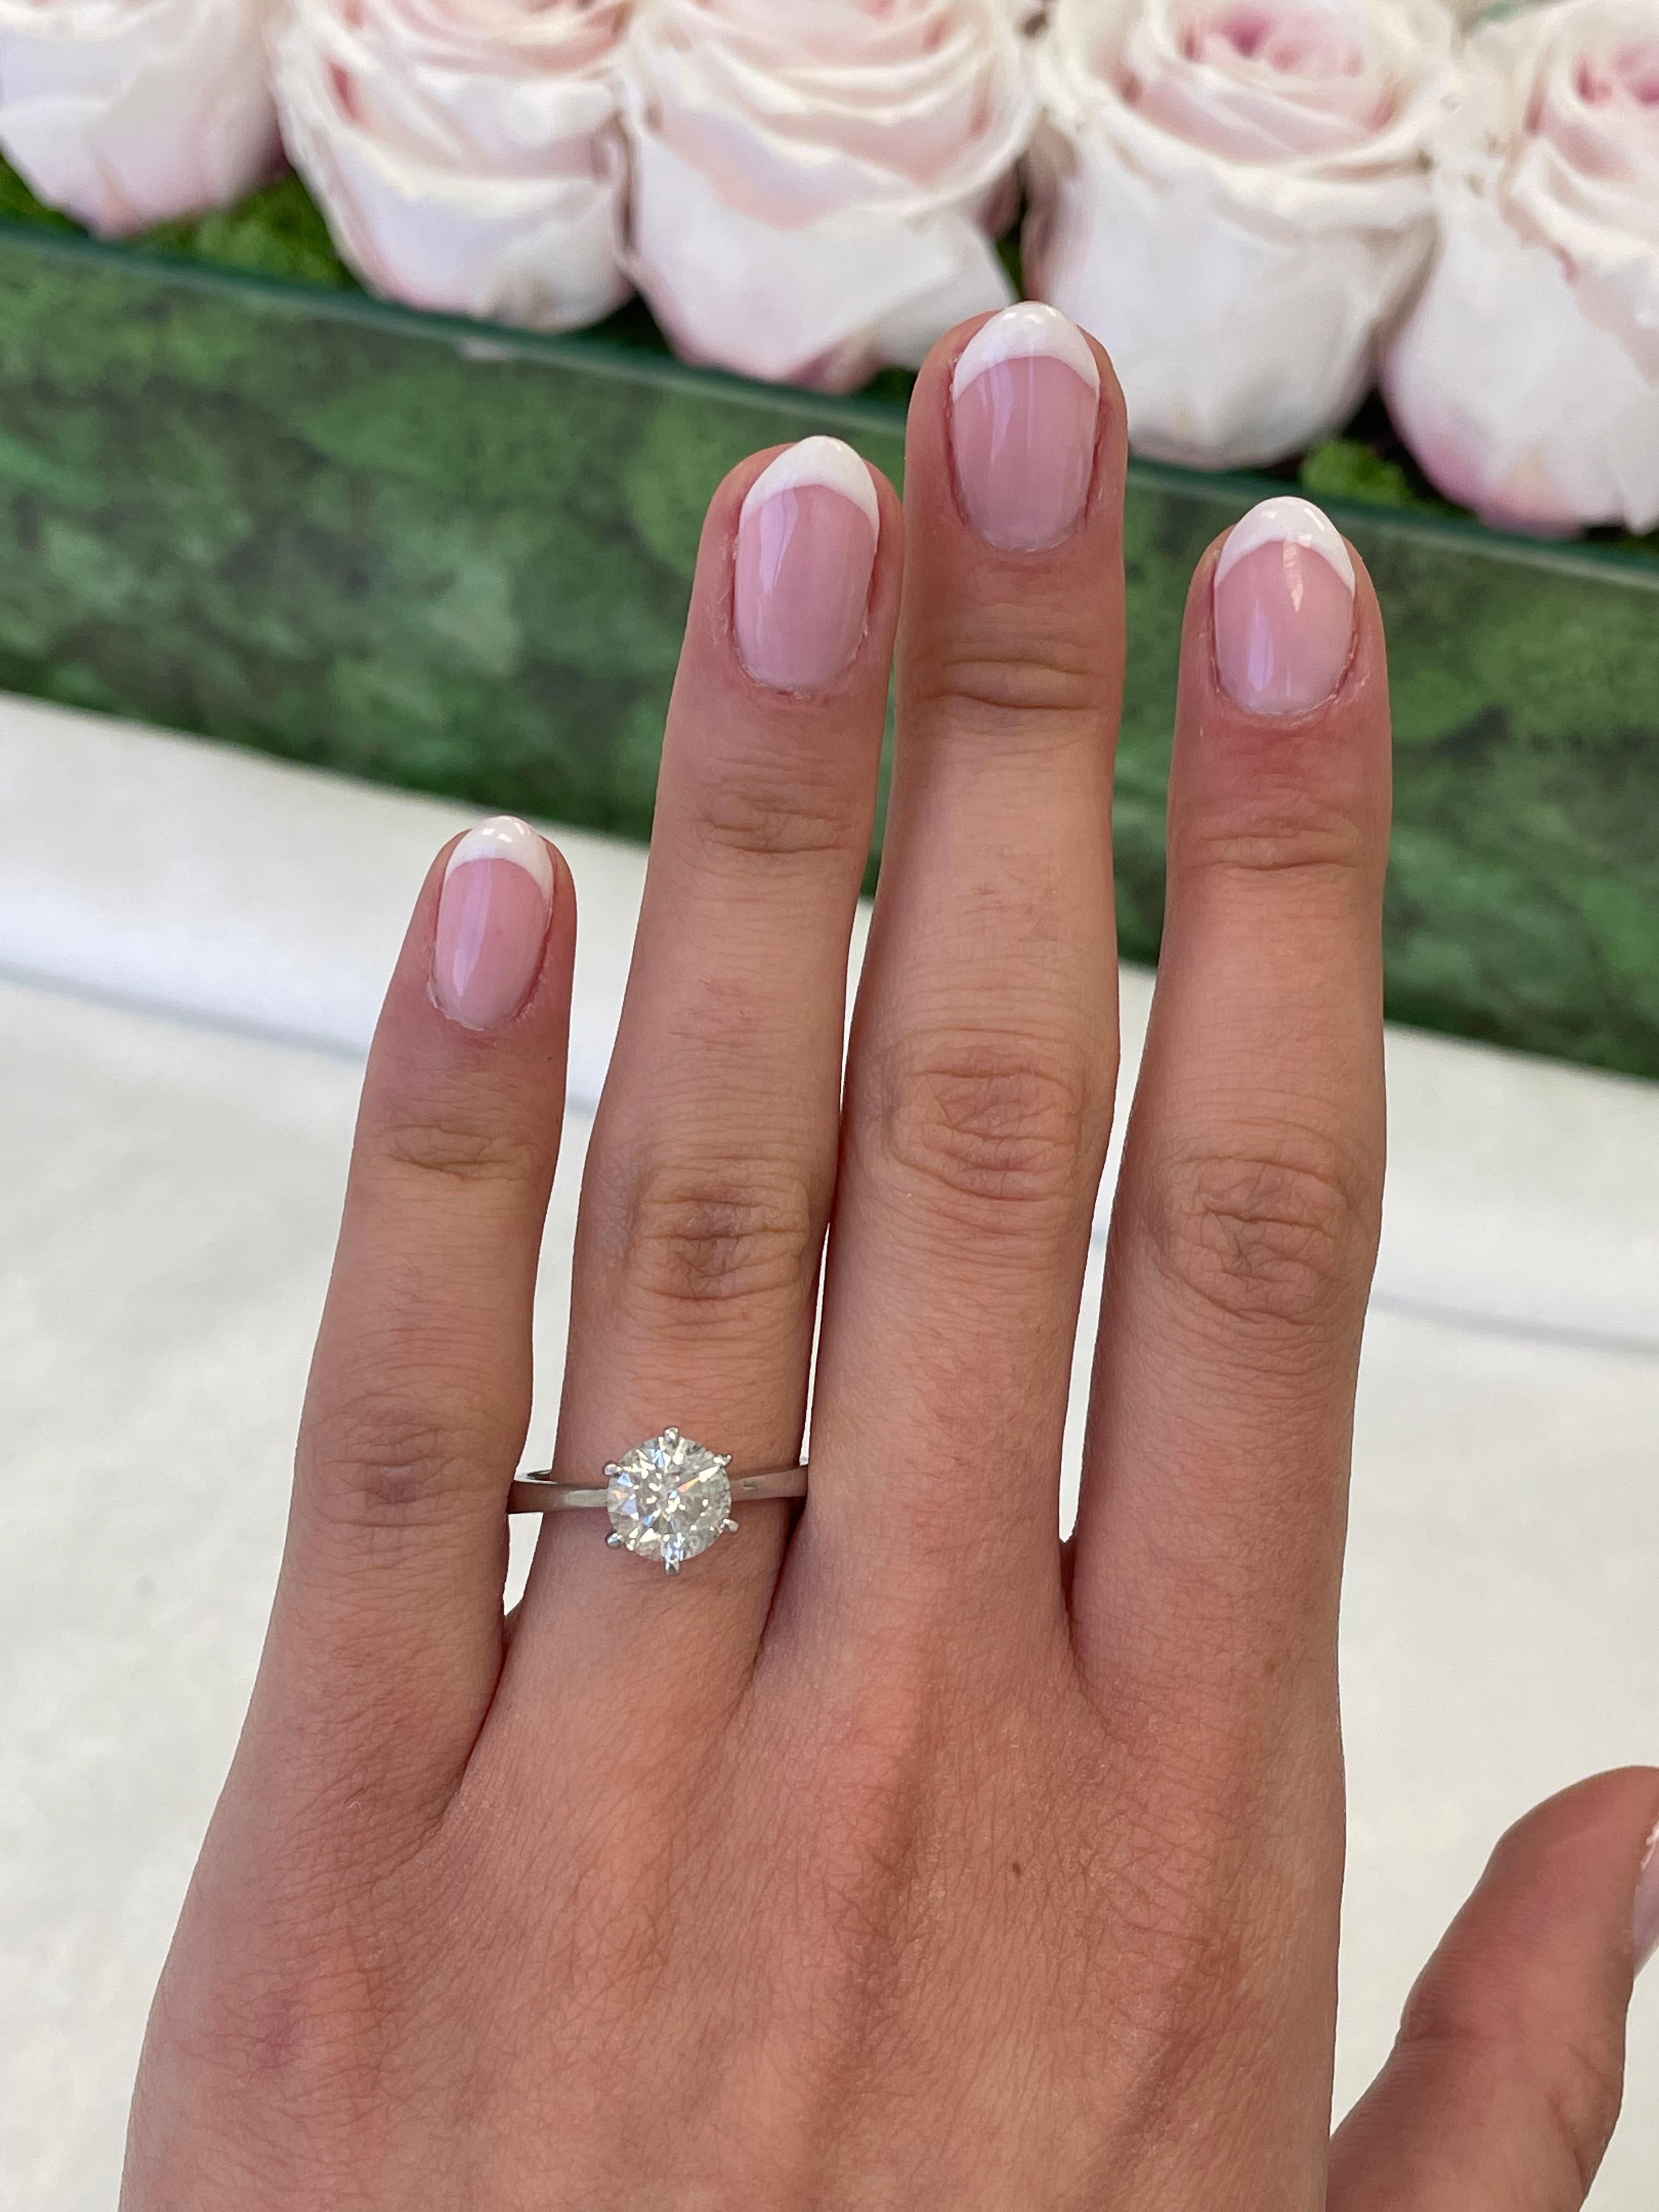 Classic solitaire diamond engagement ring Tiffany style setting.
1.55 carat round brilliant diamond, approximately G color grade and SI2/I1 clarity grade. 18-karat white gold, 3.54 grams, current ring size 7.
Accommodated with an up to date